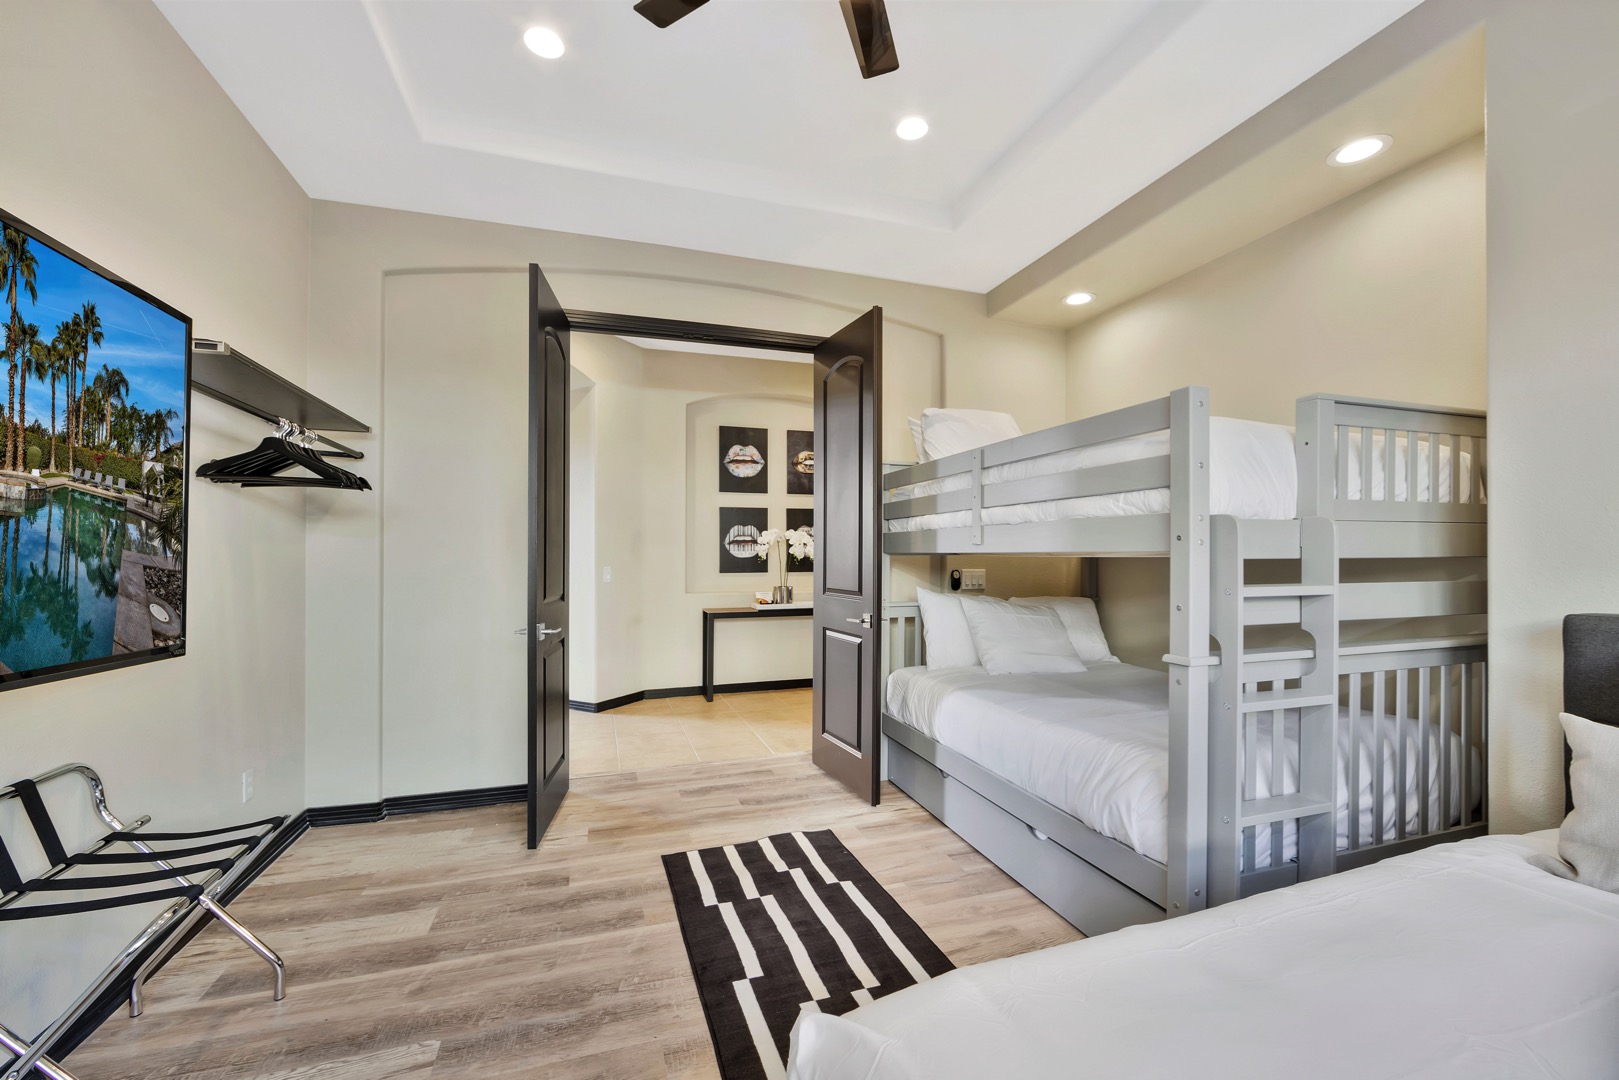 Bedroom 5 has large French doors and a 60-inch TV